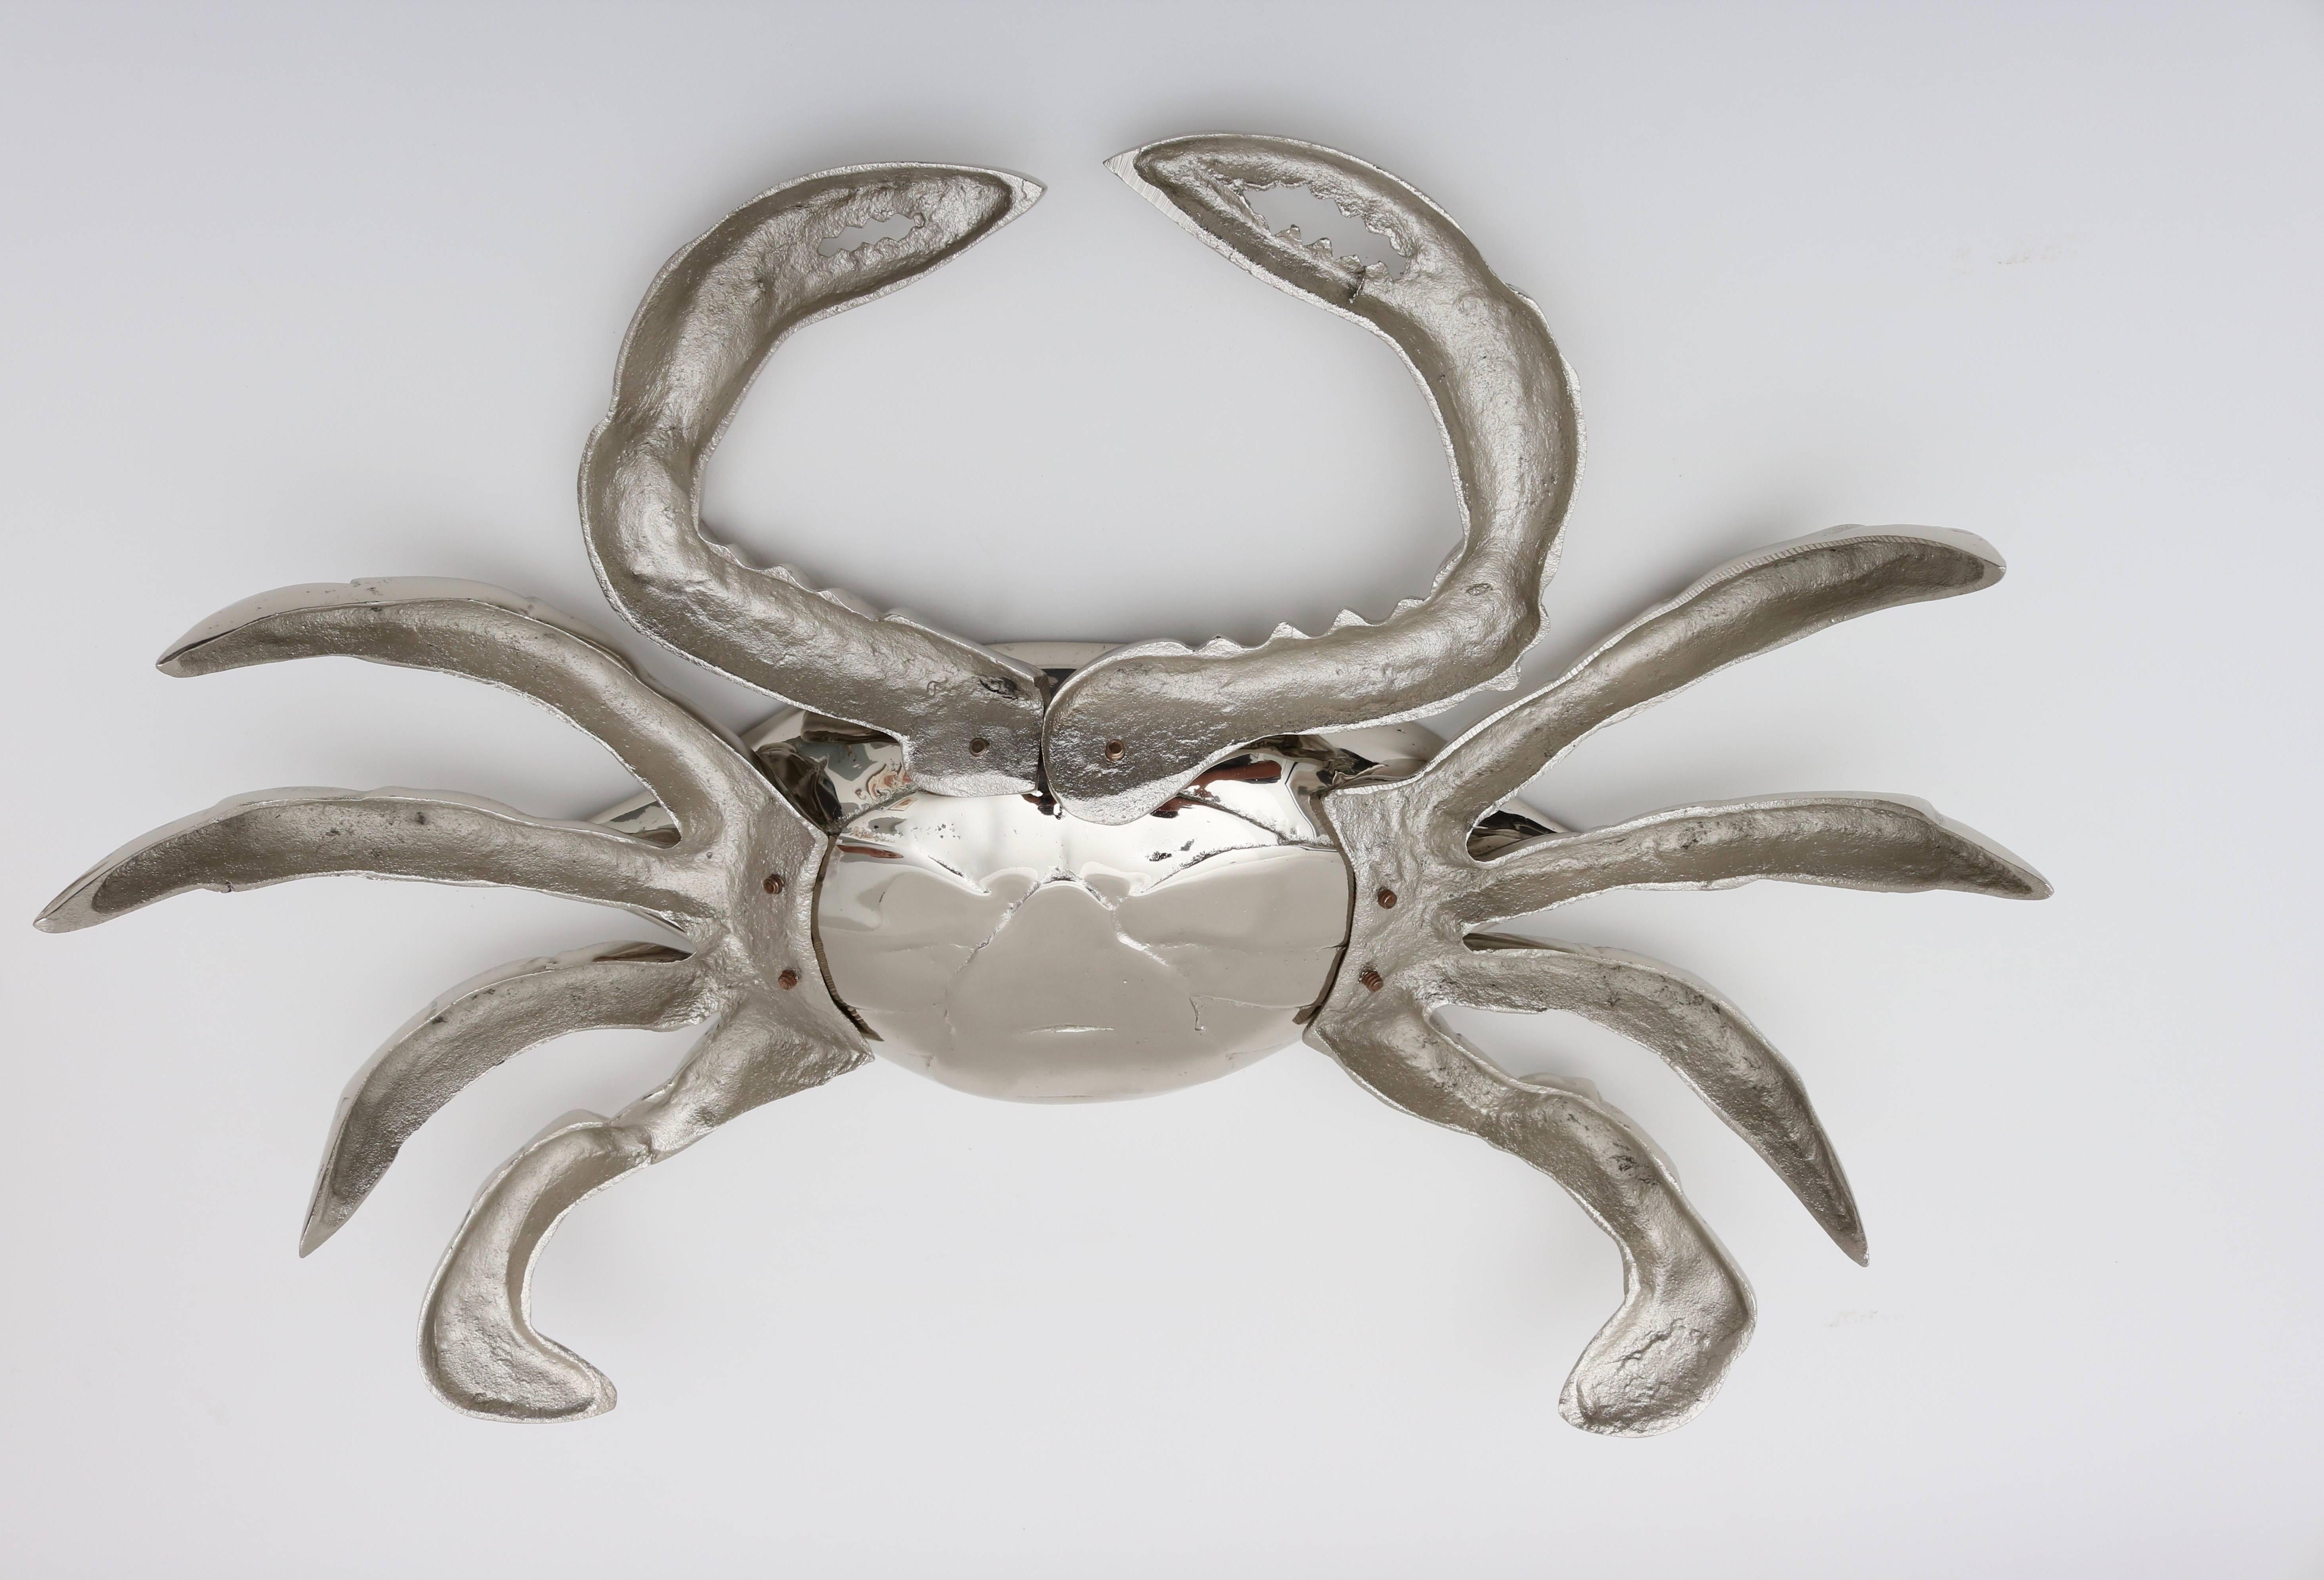 Bronze Nickle-Plated Life Size Crab-Form Lidded Dish by Angel & Zevallos